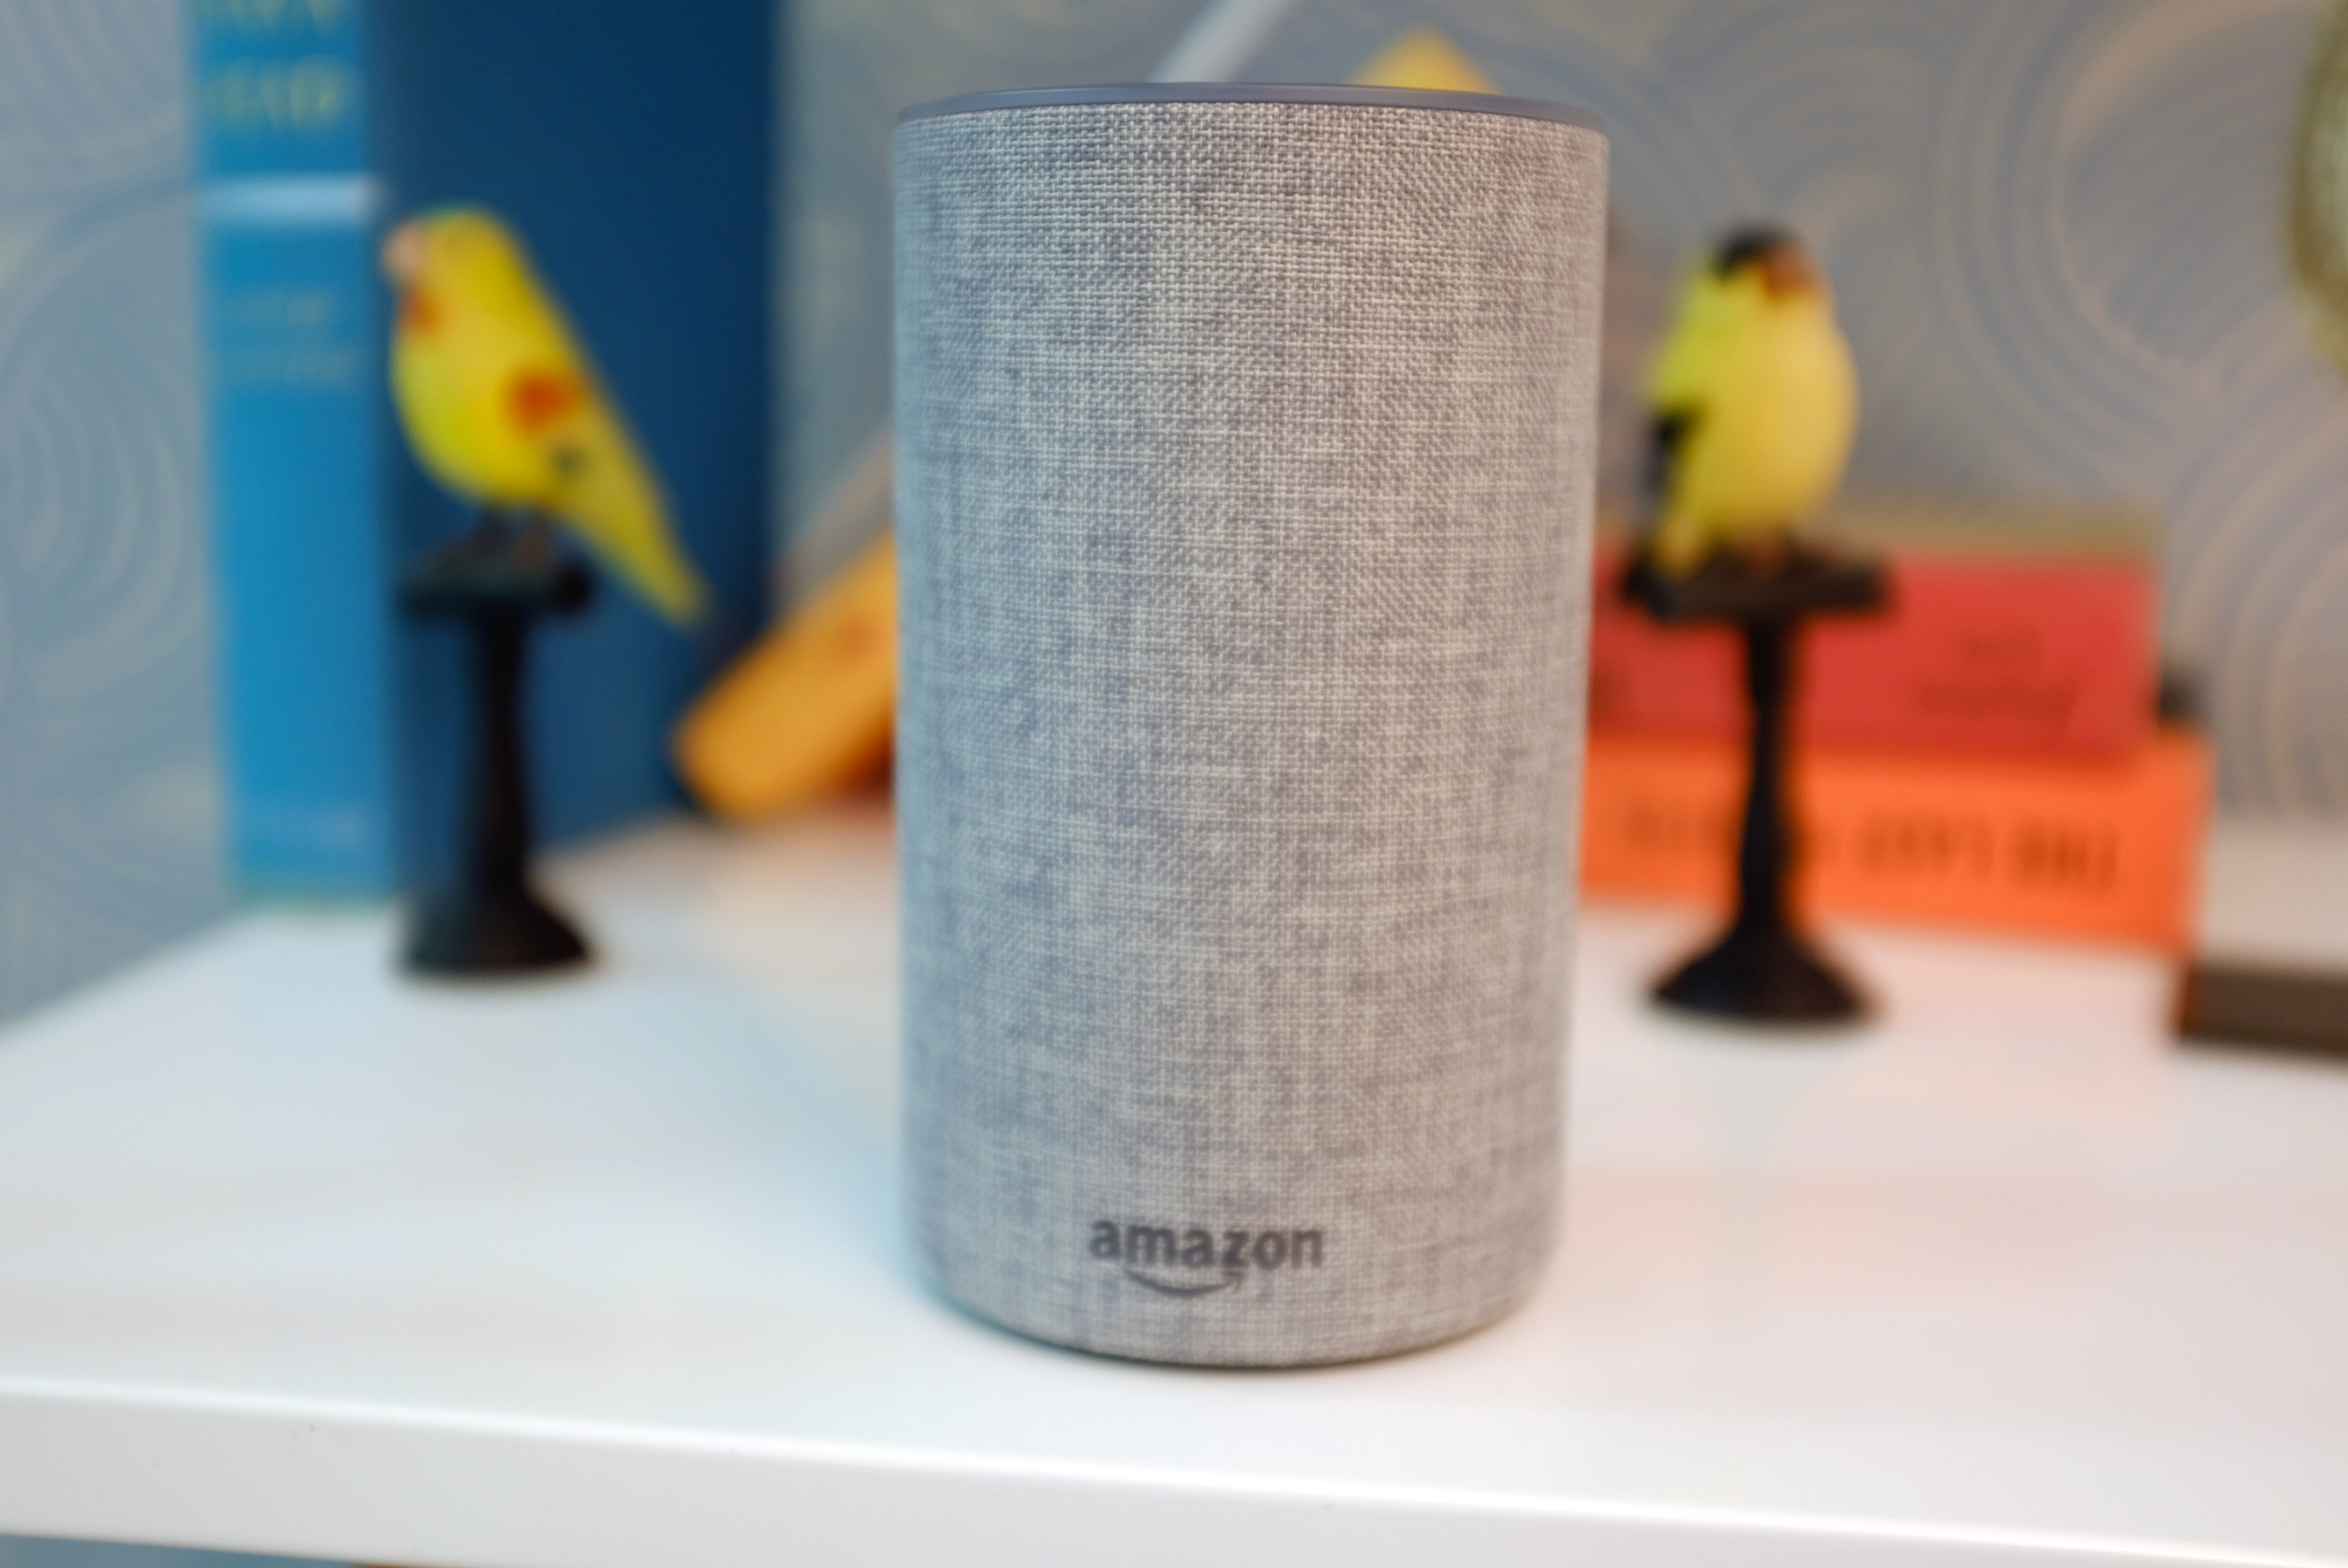 Amazon launches its Echo devices and Alexa in Japan